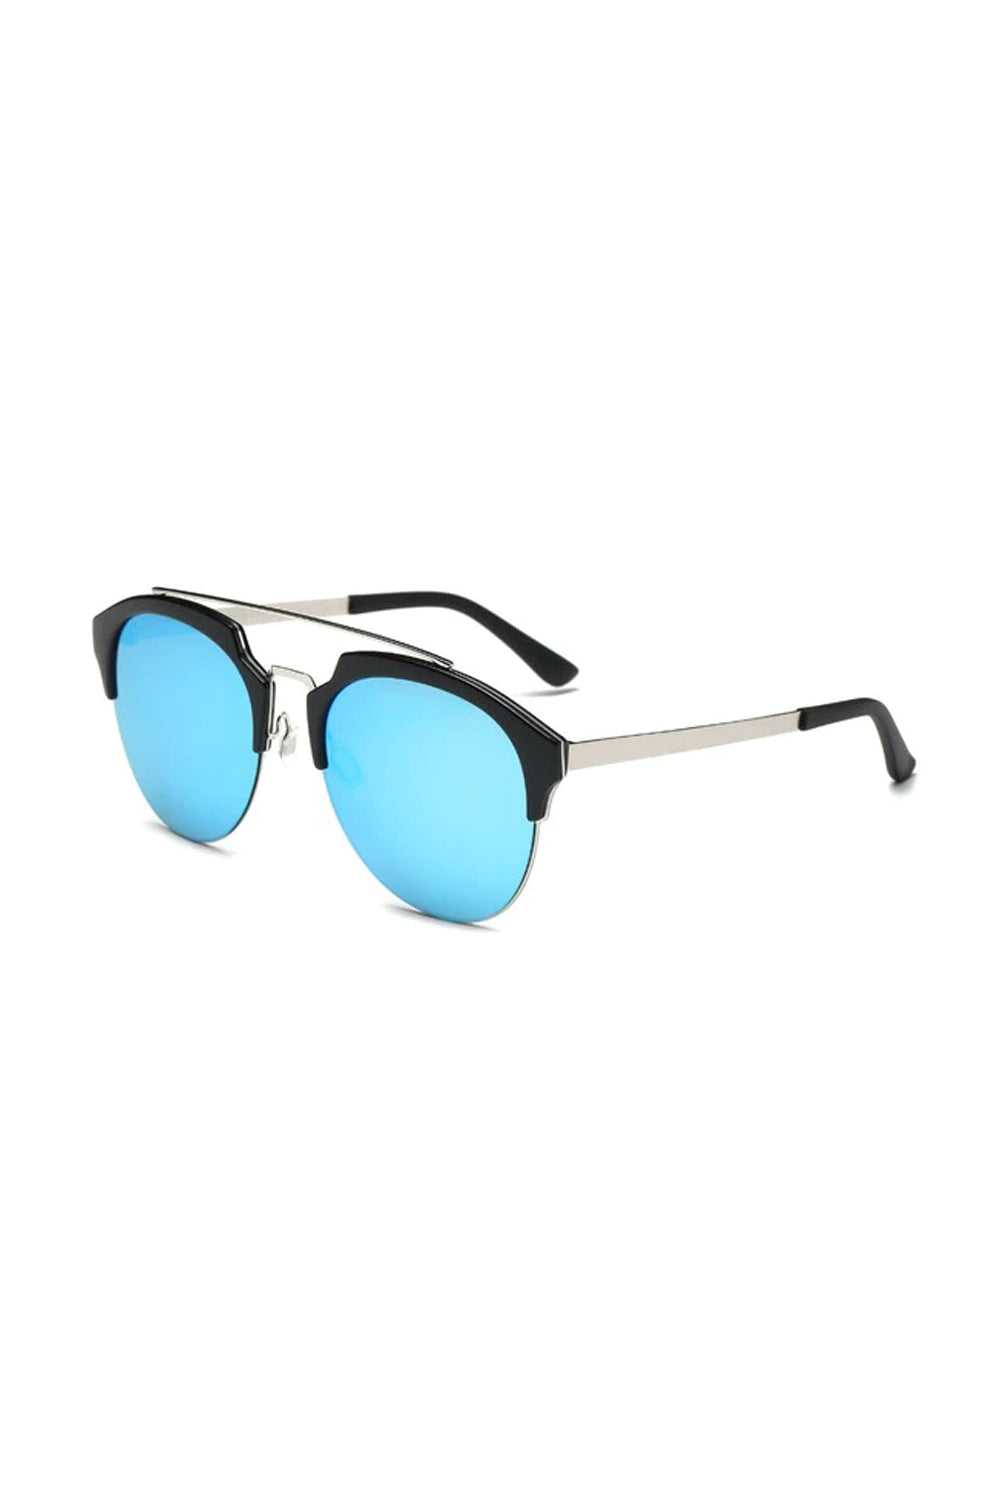 Women Round Cat Eye Fashion Sunglasses in Five Colors